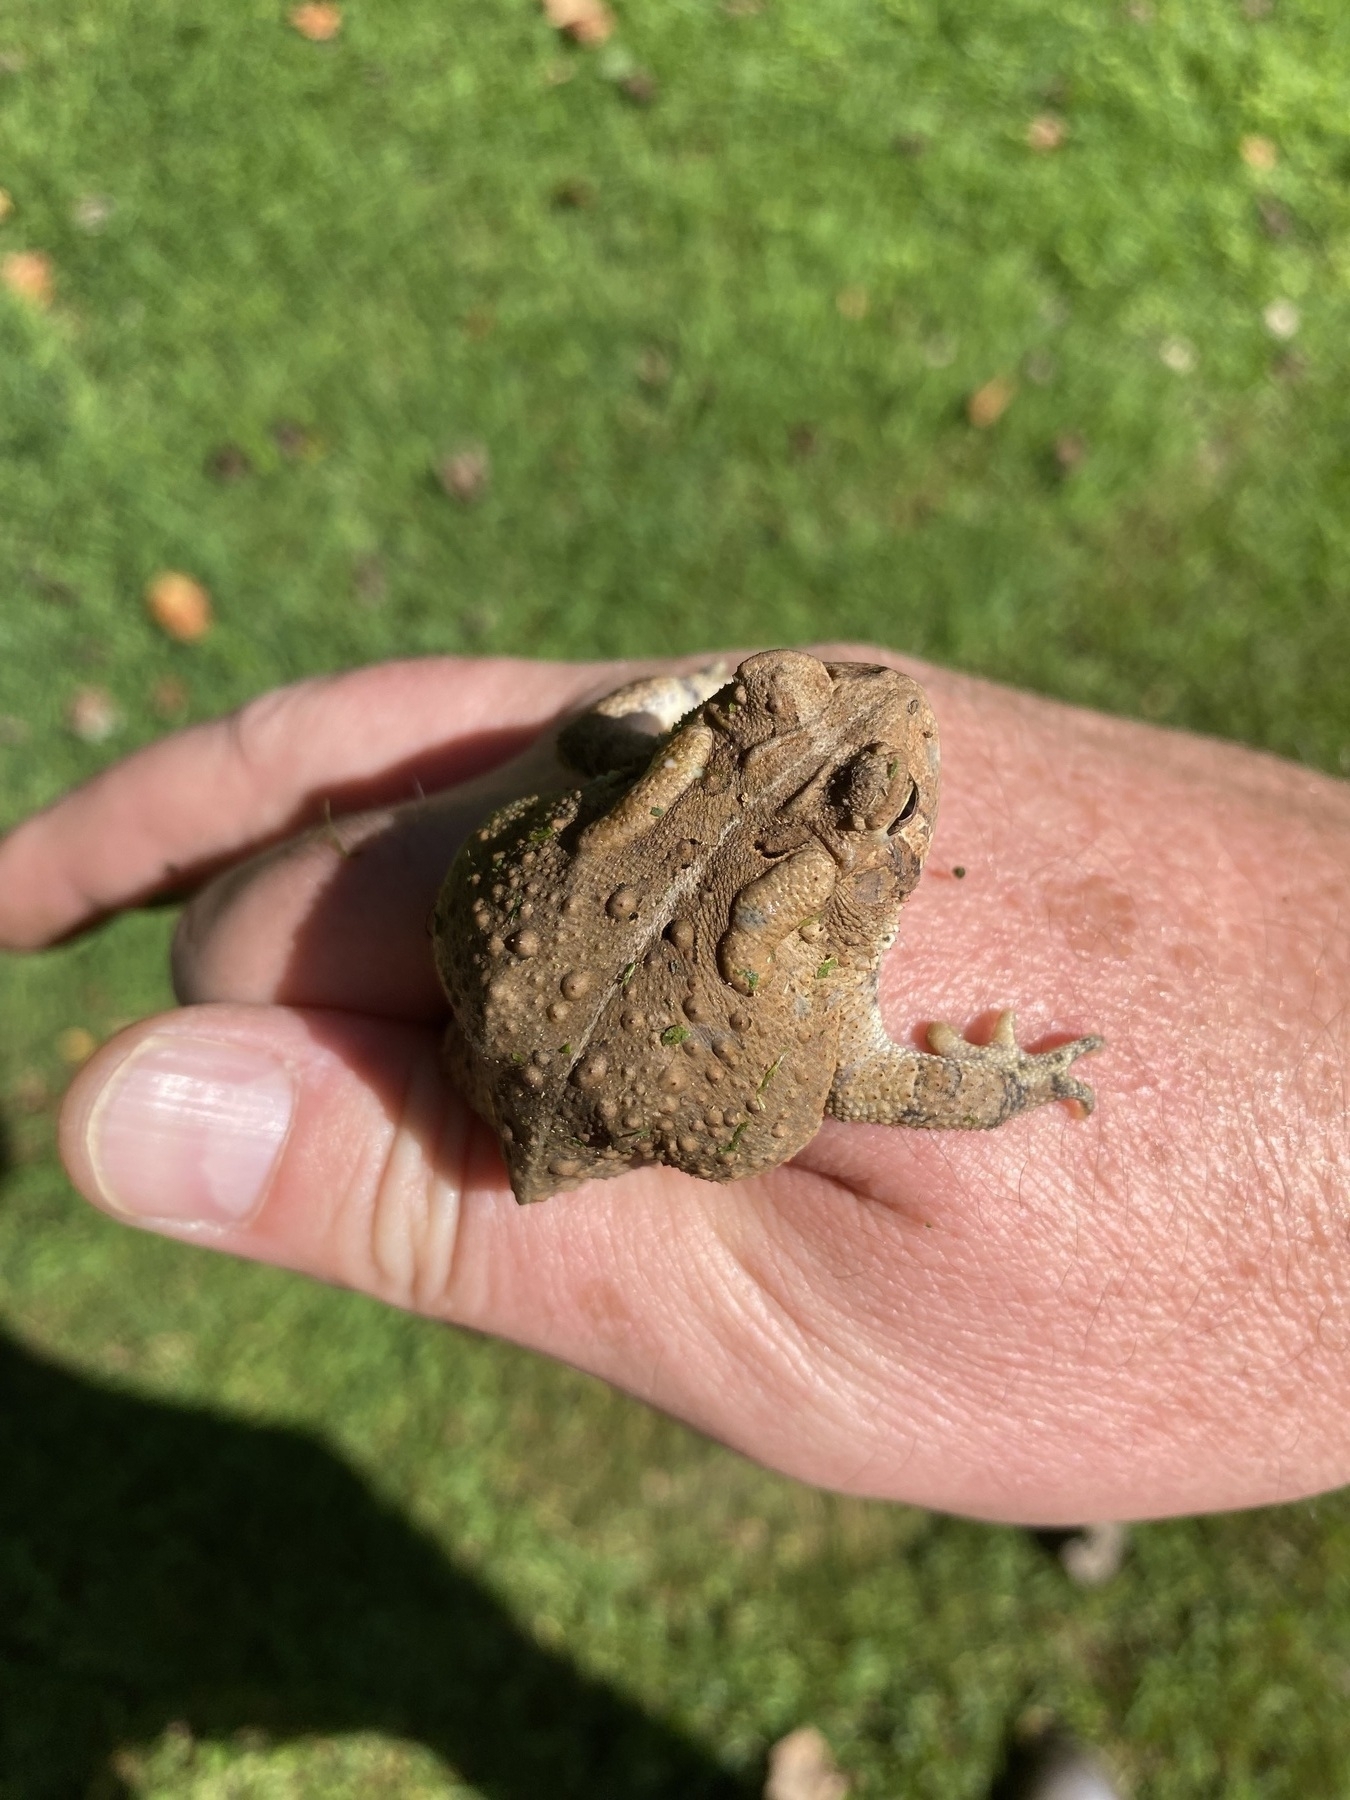 Little frog I found in the yard this morning.